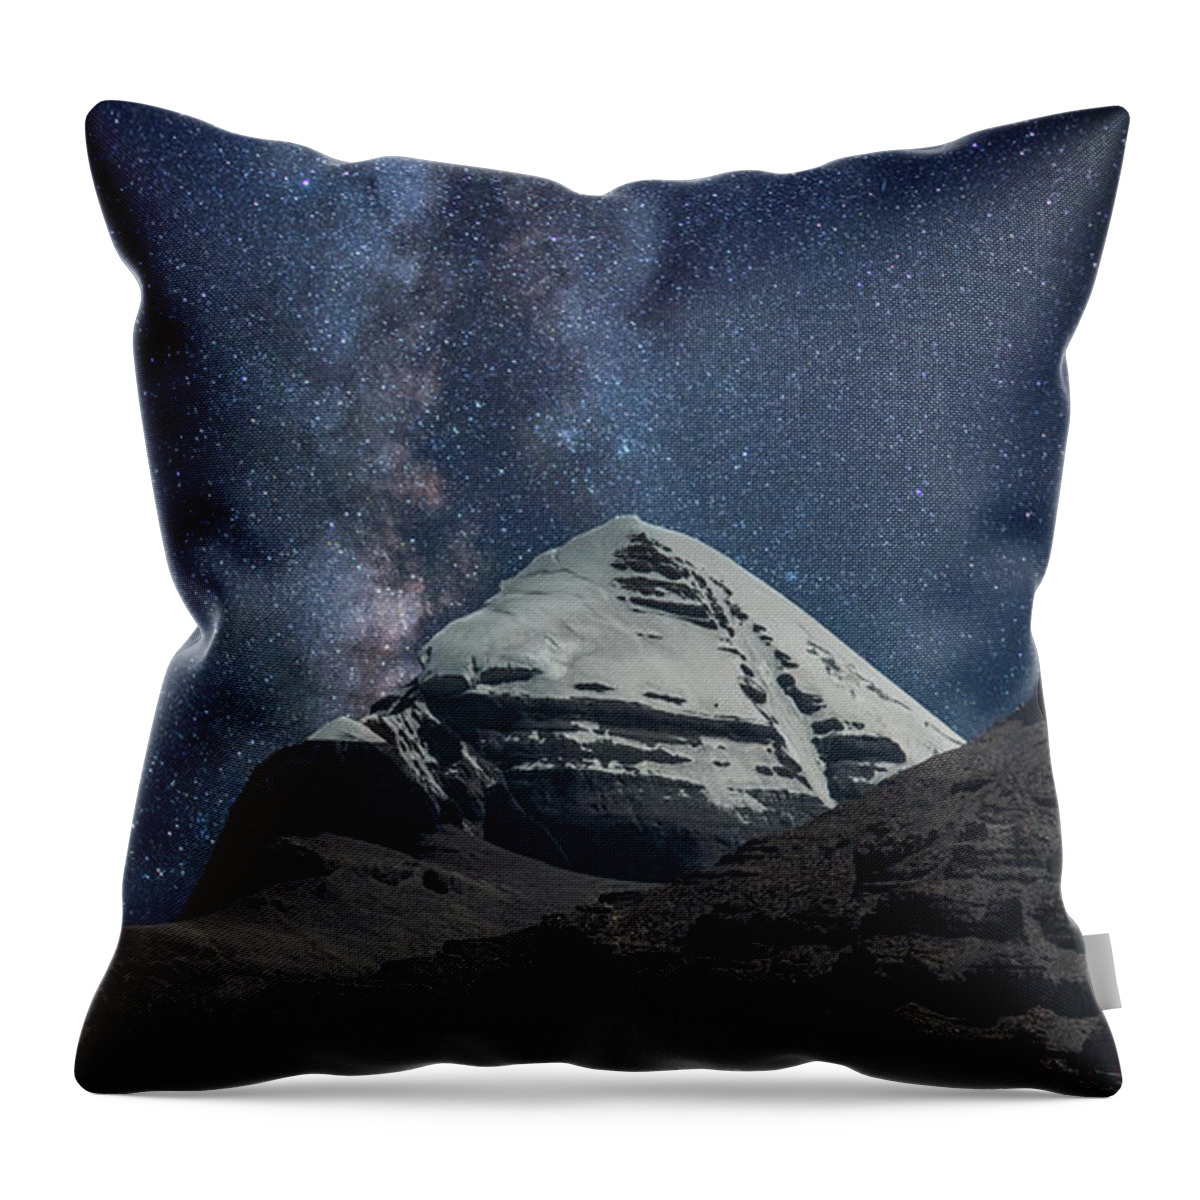 Tranquility Throw Pillow featuring the photograph Milky Way by Coolbiere Photograph